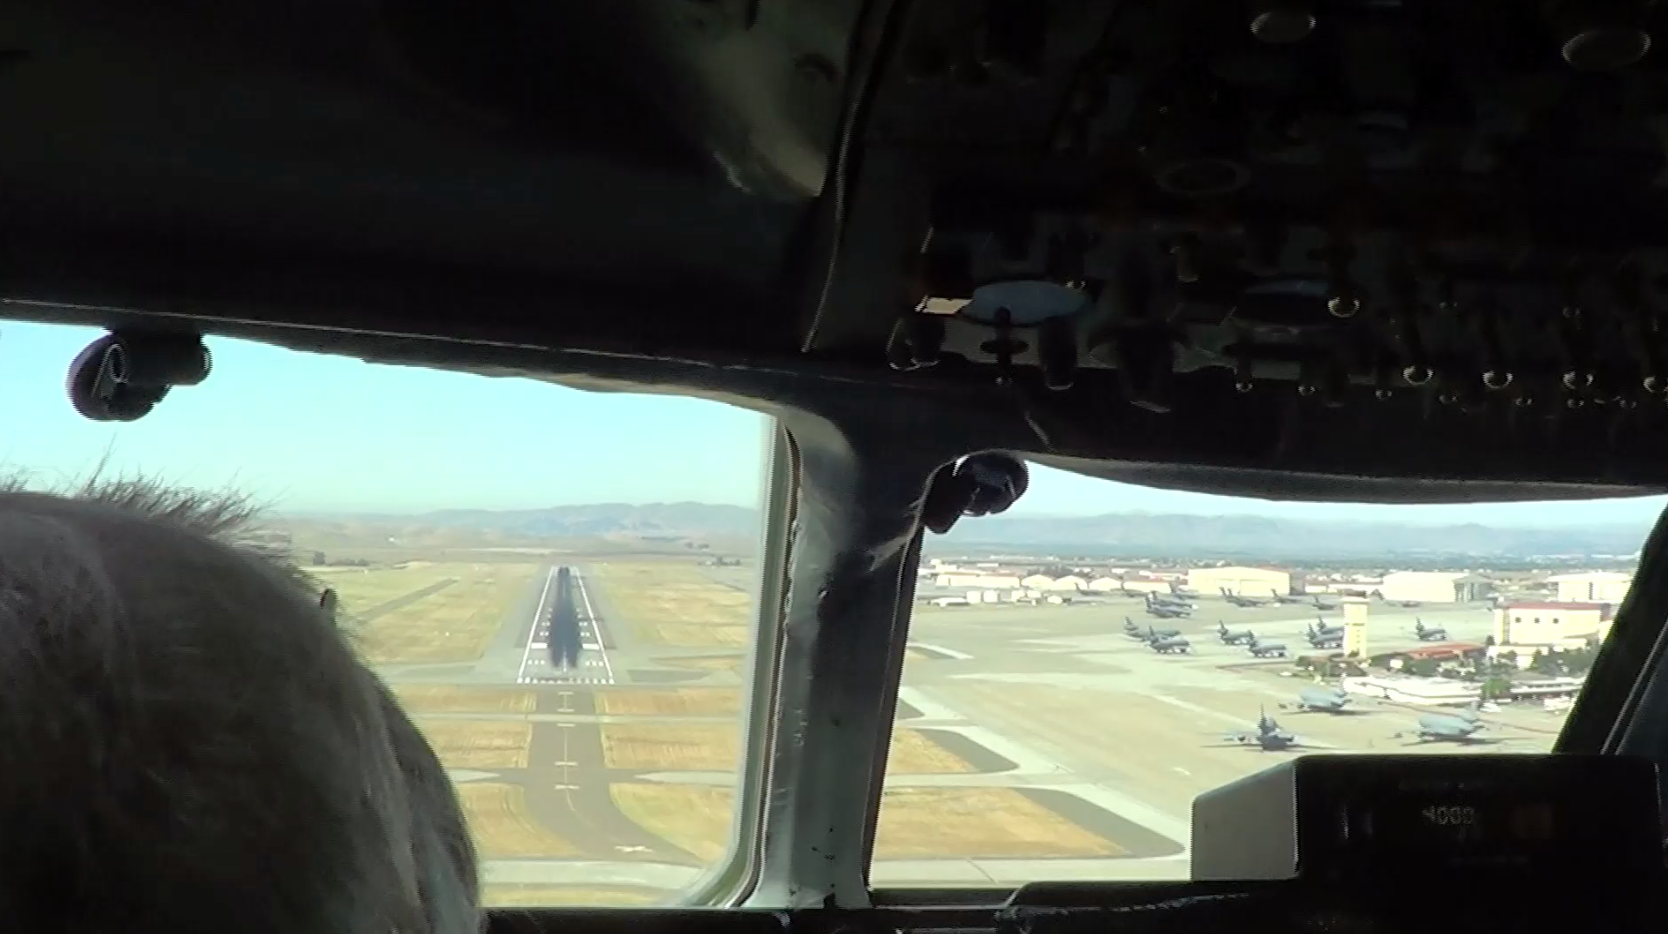 ATI DC-8-62 N799AL on very short finals to landing at Travis AFB inbound from McClellan Airport on May 12, 2013. Notice the ramps filled with USAF KC-10 tankers. This is a screenshot from the 9 episode mini series "DC-8 Farewell" that streams on the JetFlix TV streaming service for aviation super fans.